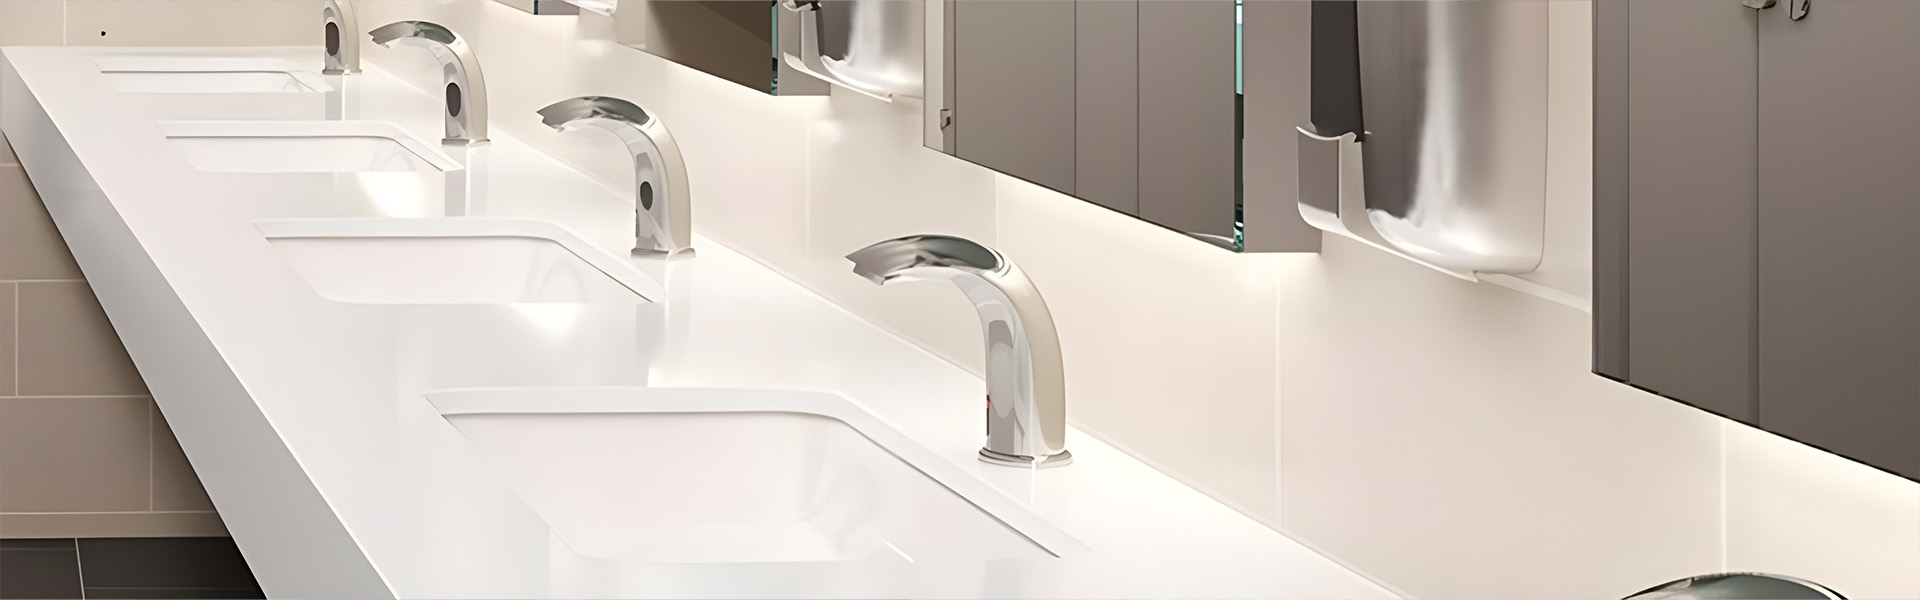 Challenges with Touchless Bathroom Faucets